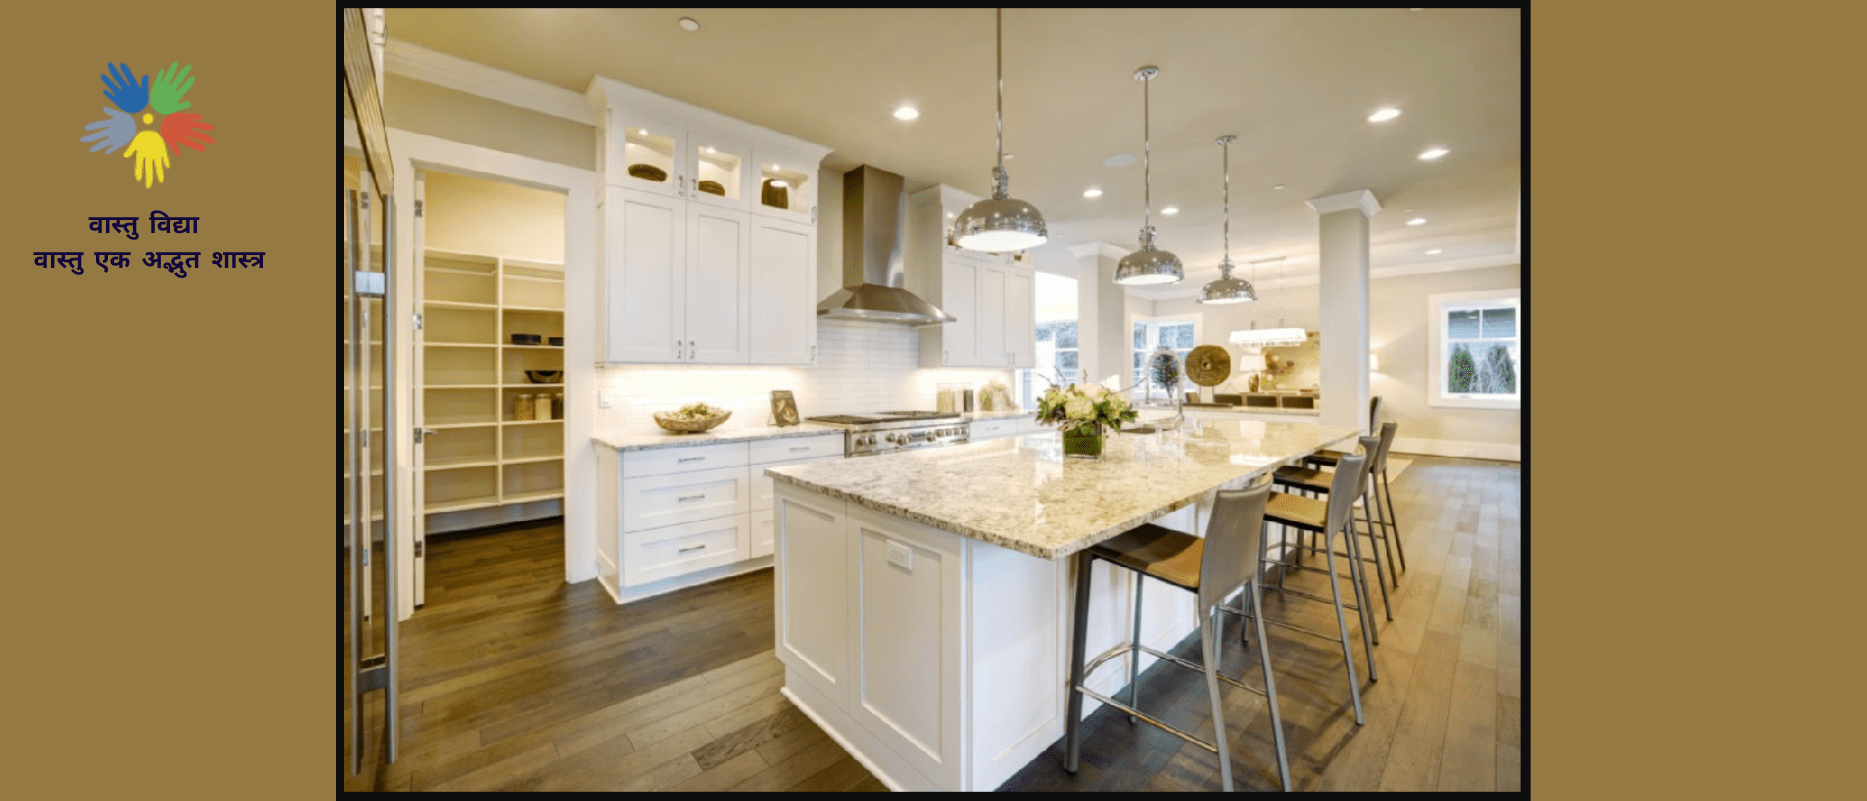 Vastu tips for kitchen, stove placement, sink placement, stove facing, slab colors